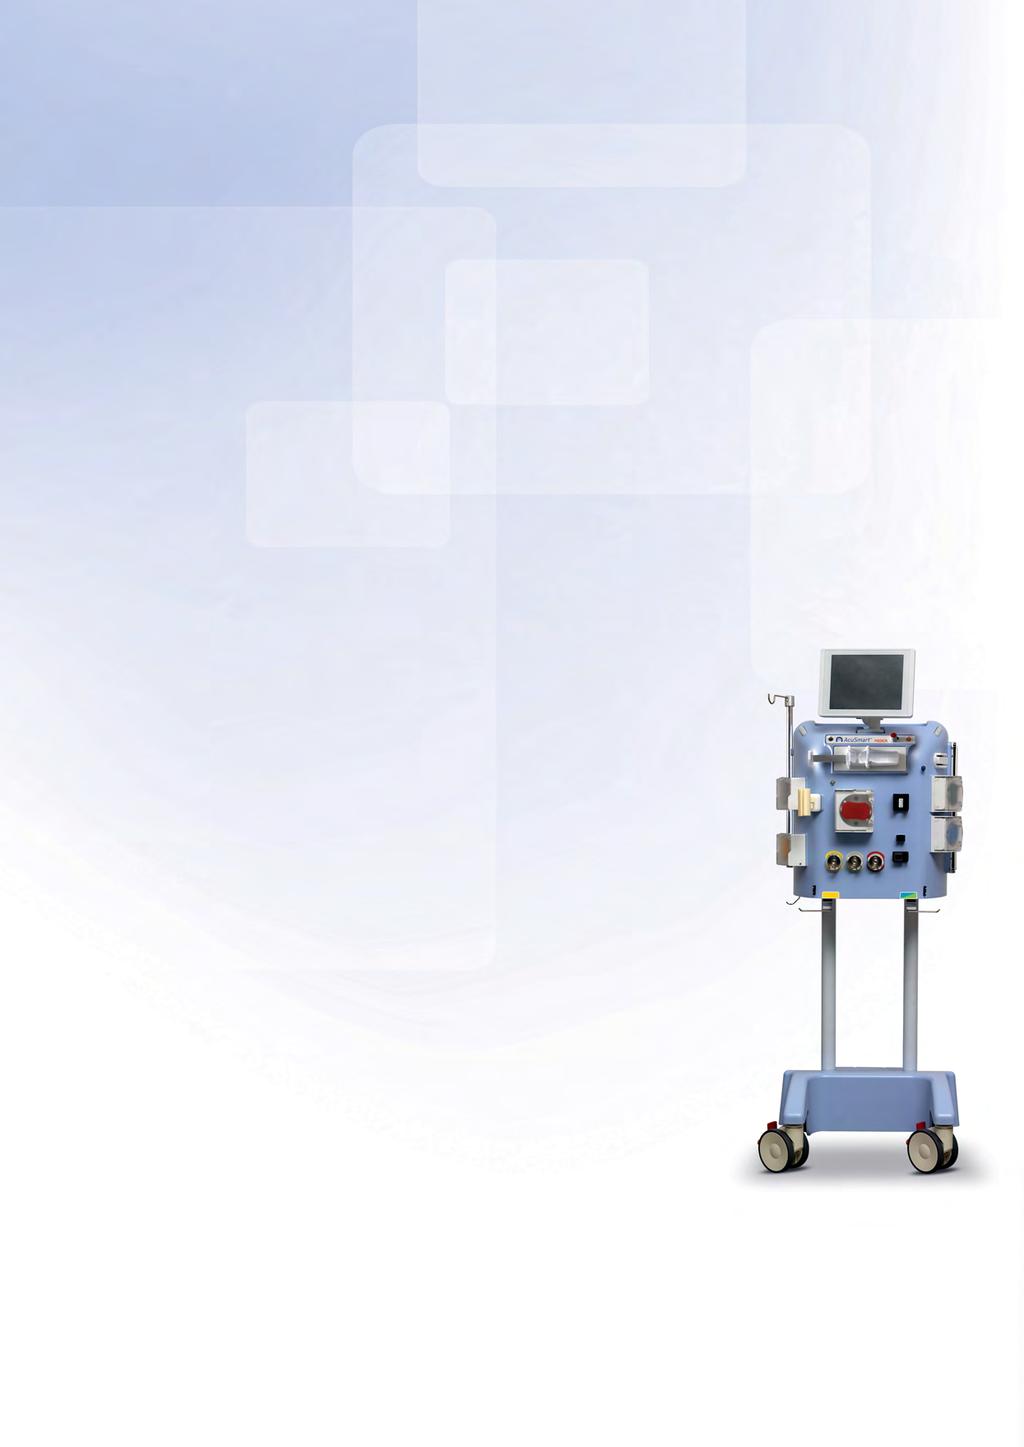 Clinical Options Choice of co-current/countercurrent AcuSmart gives you the choice and flexibility to decide between the conventional countercurrent flow and a unique co-current flow option.